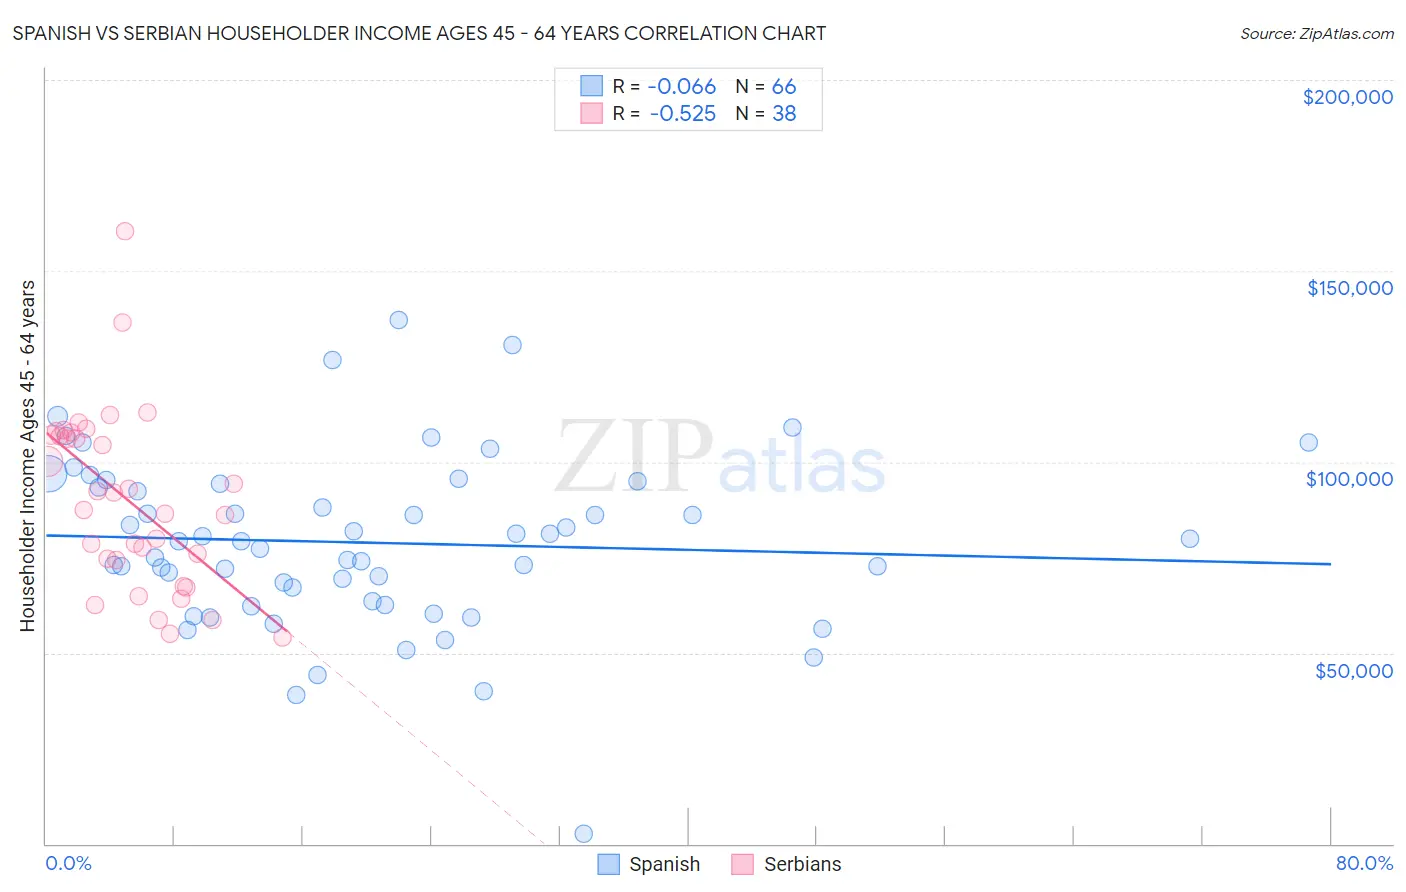 Spanish vs Serbian Householder Income Ages 45 - 64 years